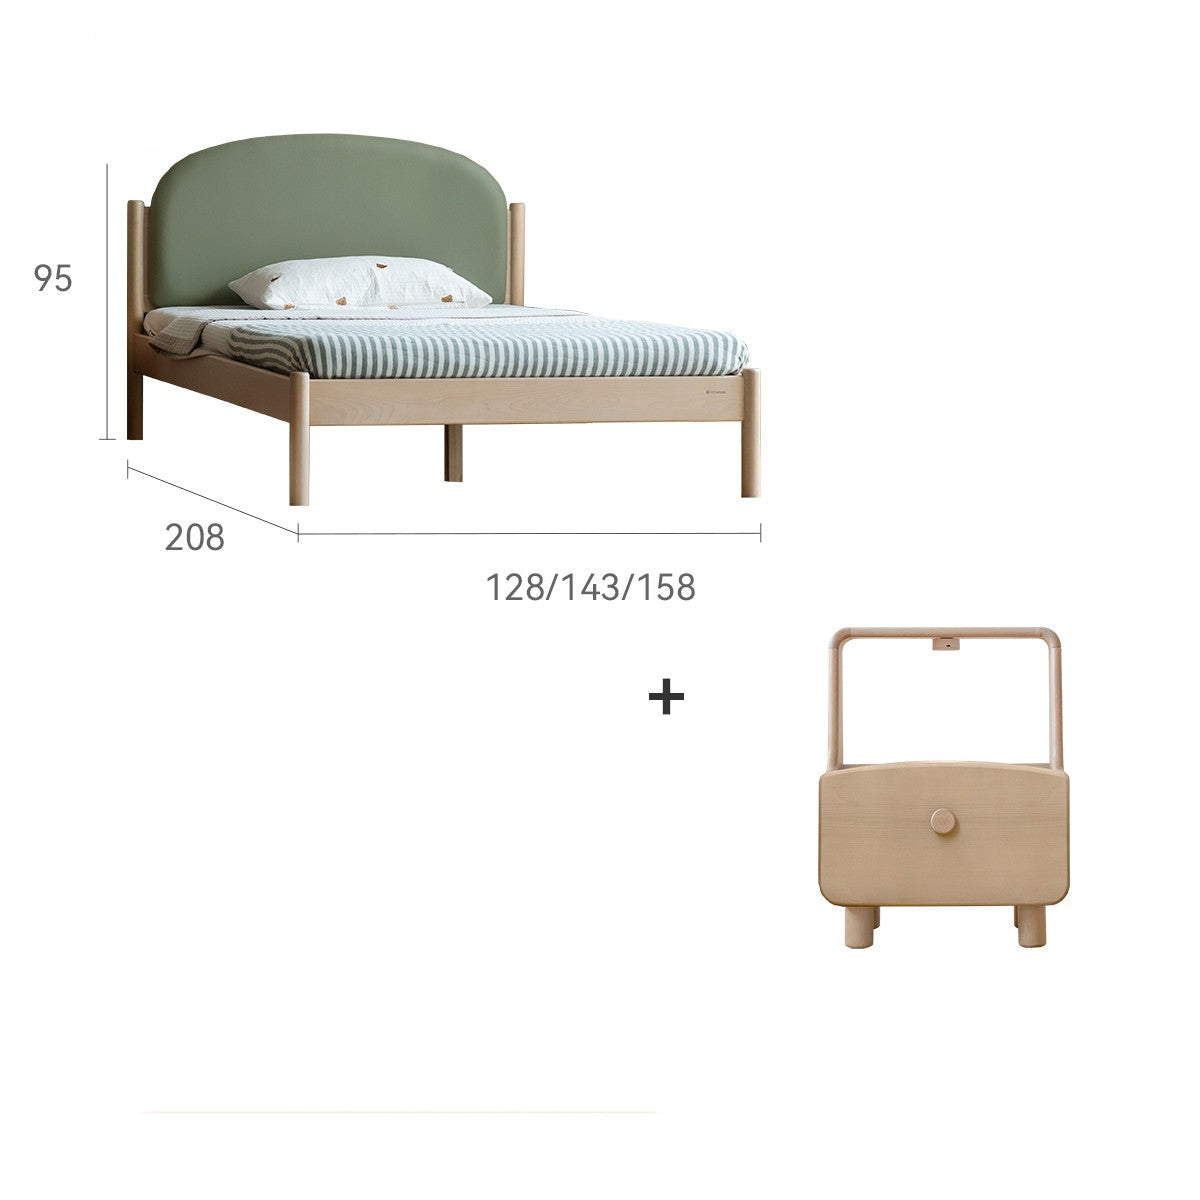 Birch solid Wood Children's Bed Organic Leather"